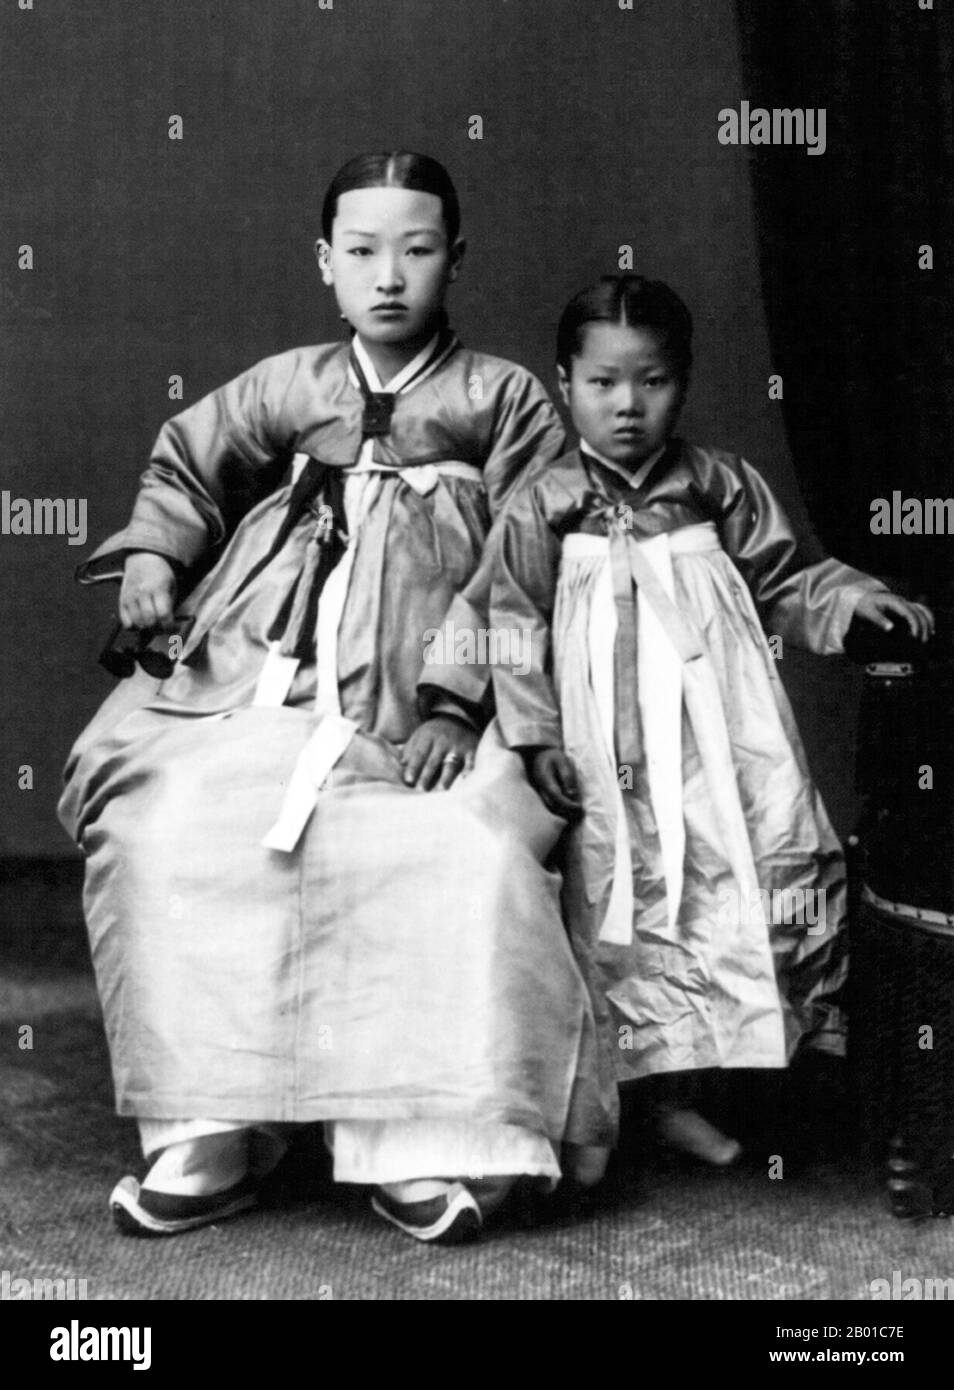 Joseon Dynasty Black And White Stock Photos Images Alamy October 19, 1851 in yeoju, kingdom of joseon. https www alamy com a young korean woman poses with her daughter wearing traditional hanbok dress c 1910 hanbok south korea or chosn ot north korea is the traditional korean dress it is often characterized by vibrant colors and simple lines without pockets although the term literally means korean clothing hanbok today often refers specifically to hanbok of joseon dynasty and is worn as semi formal or formal wear during traditional festivals and celebrations the modern hanbok does not exactly follow the actual style as worn in joseon dynasty since it underwent some major changes during the 20th cen image344238930 html